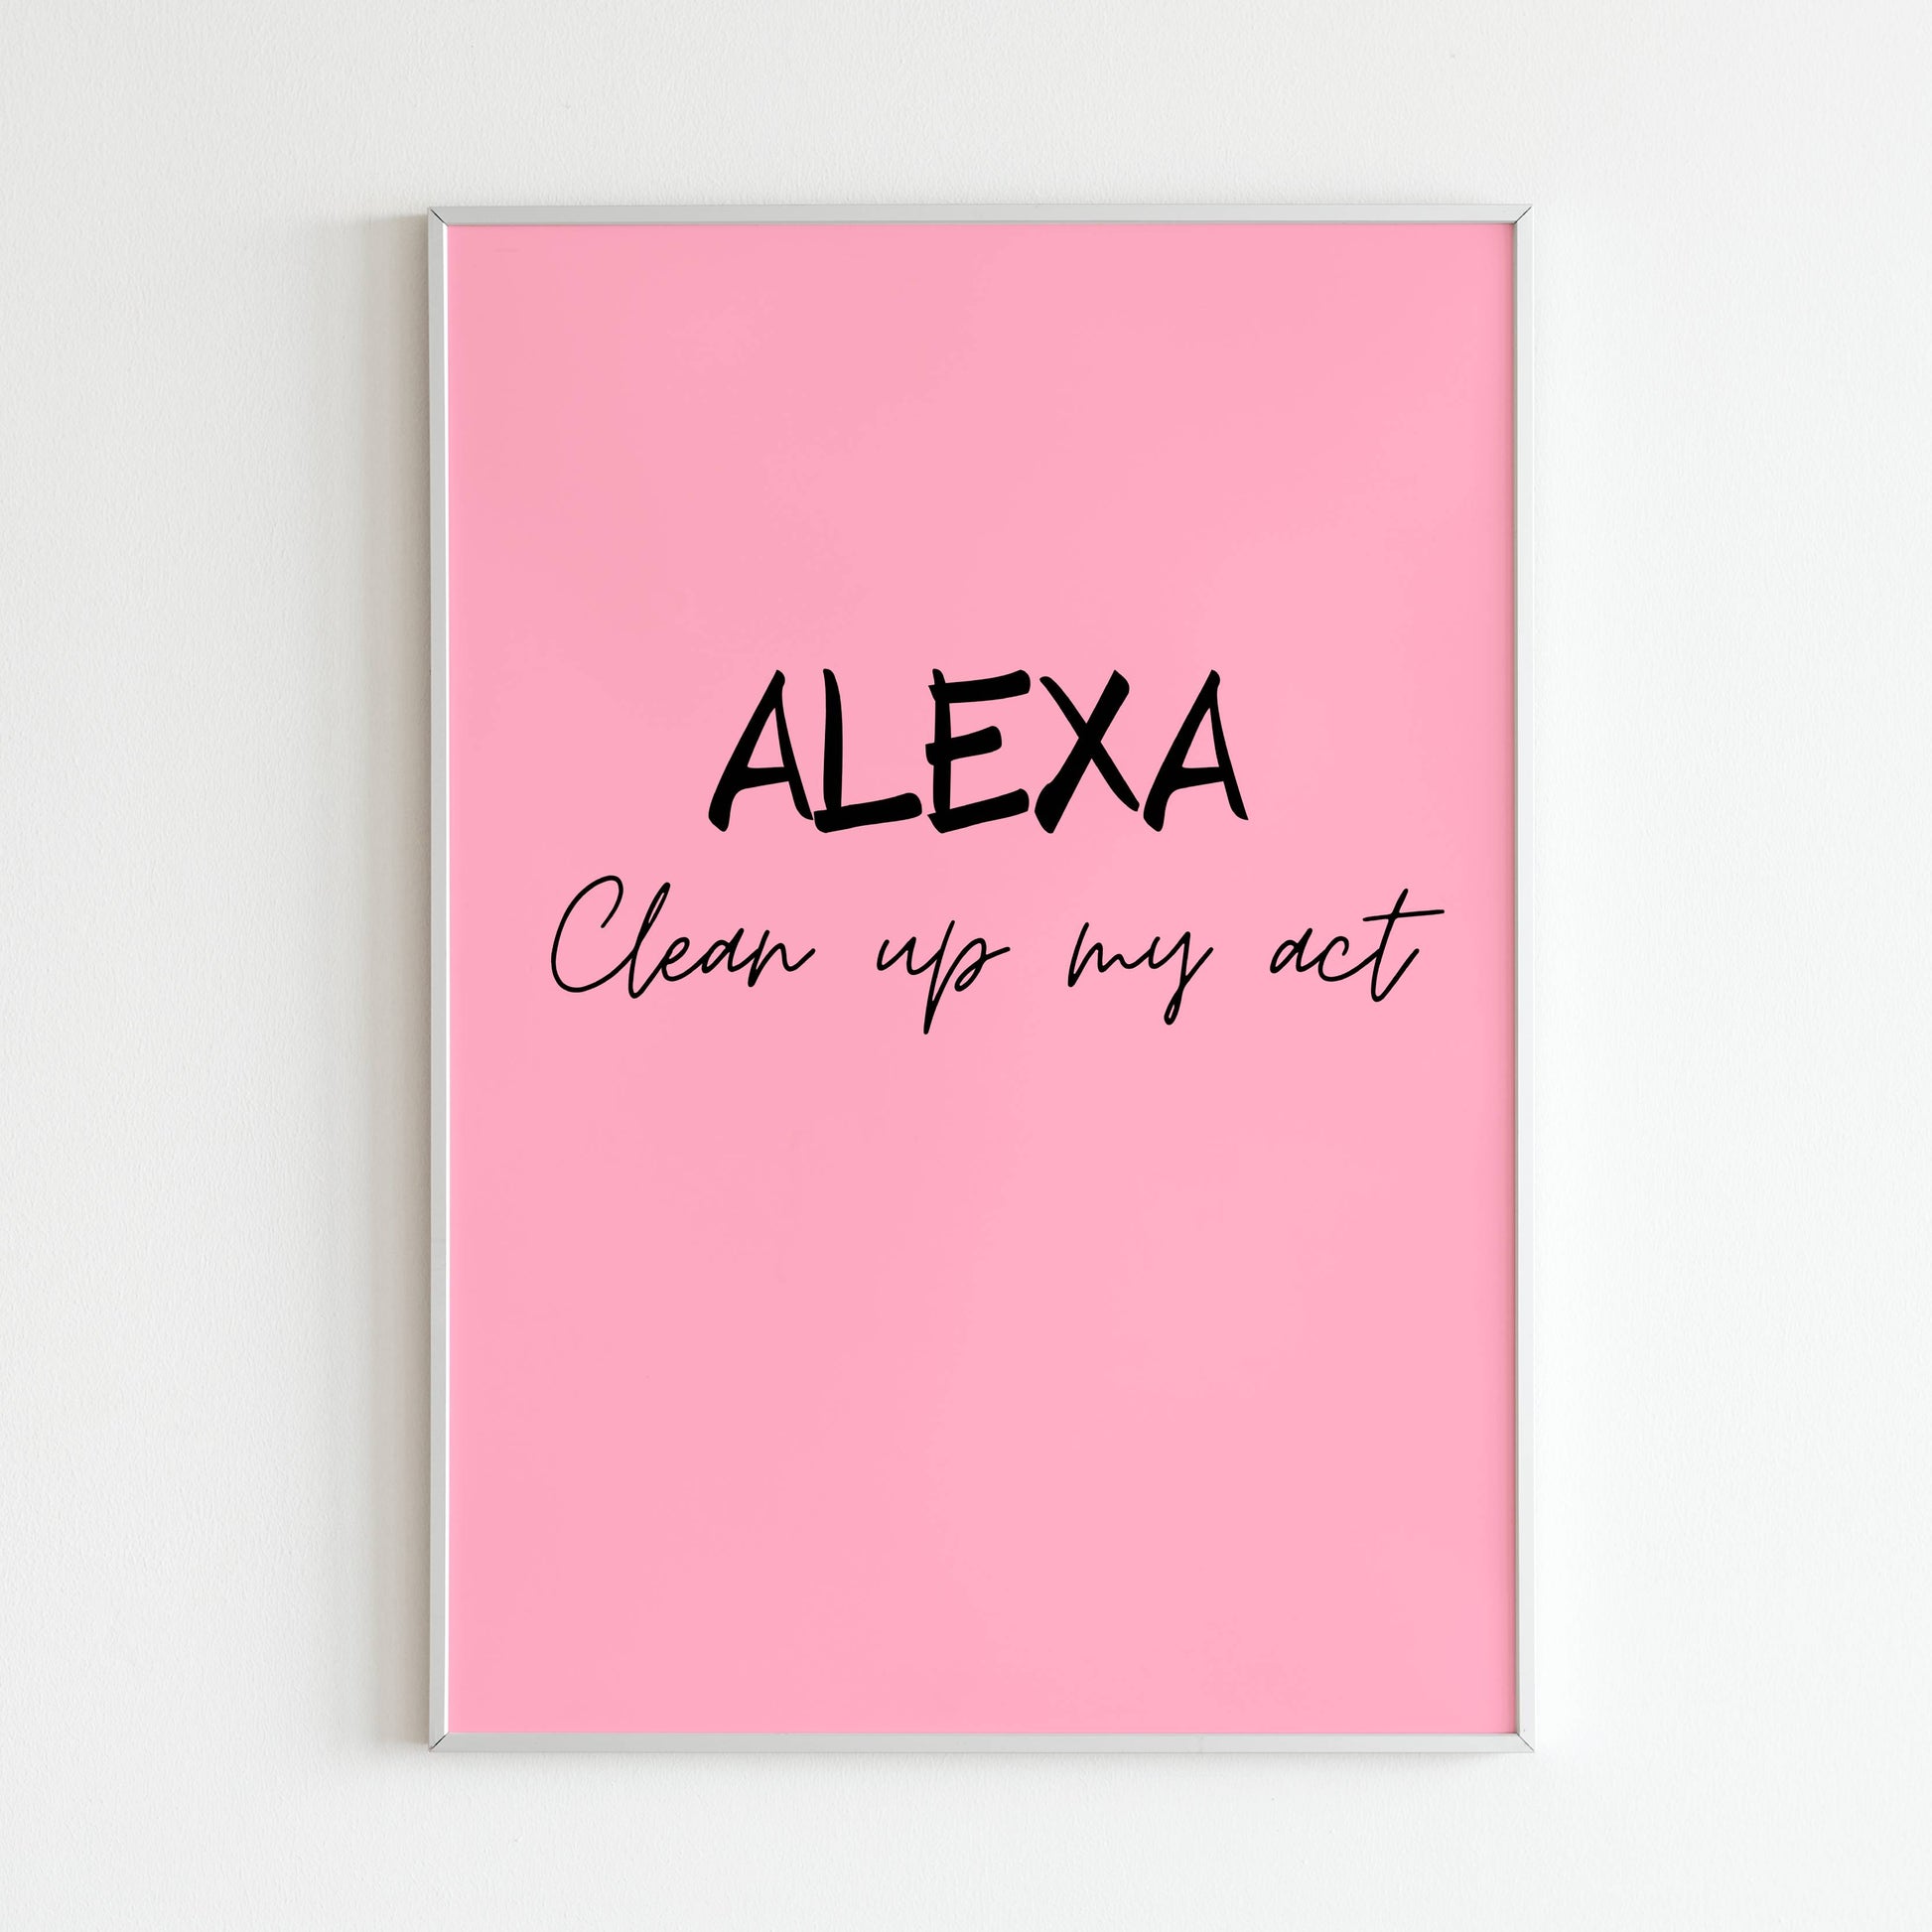 Downloadable "Alexa, Clean up my act" art print, a reminder to stay focused and achieve goals.